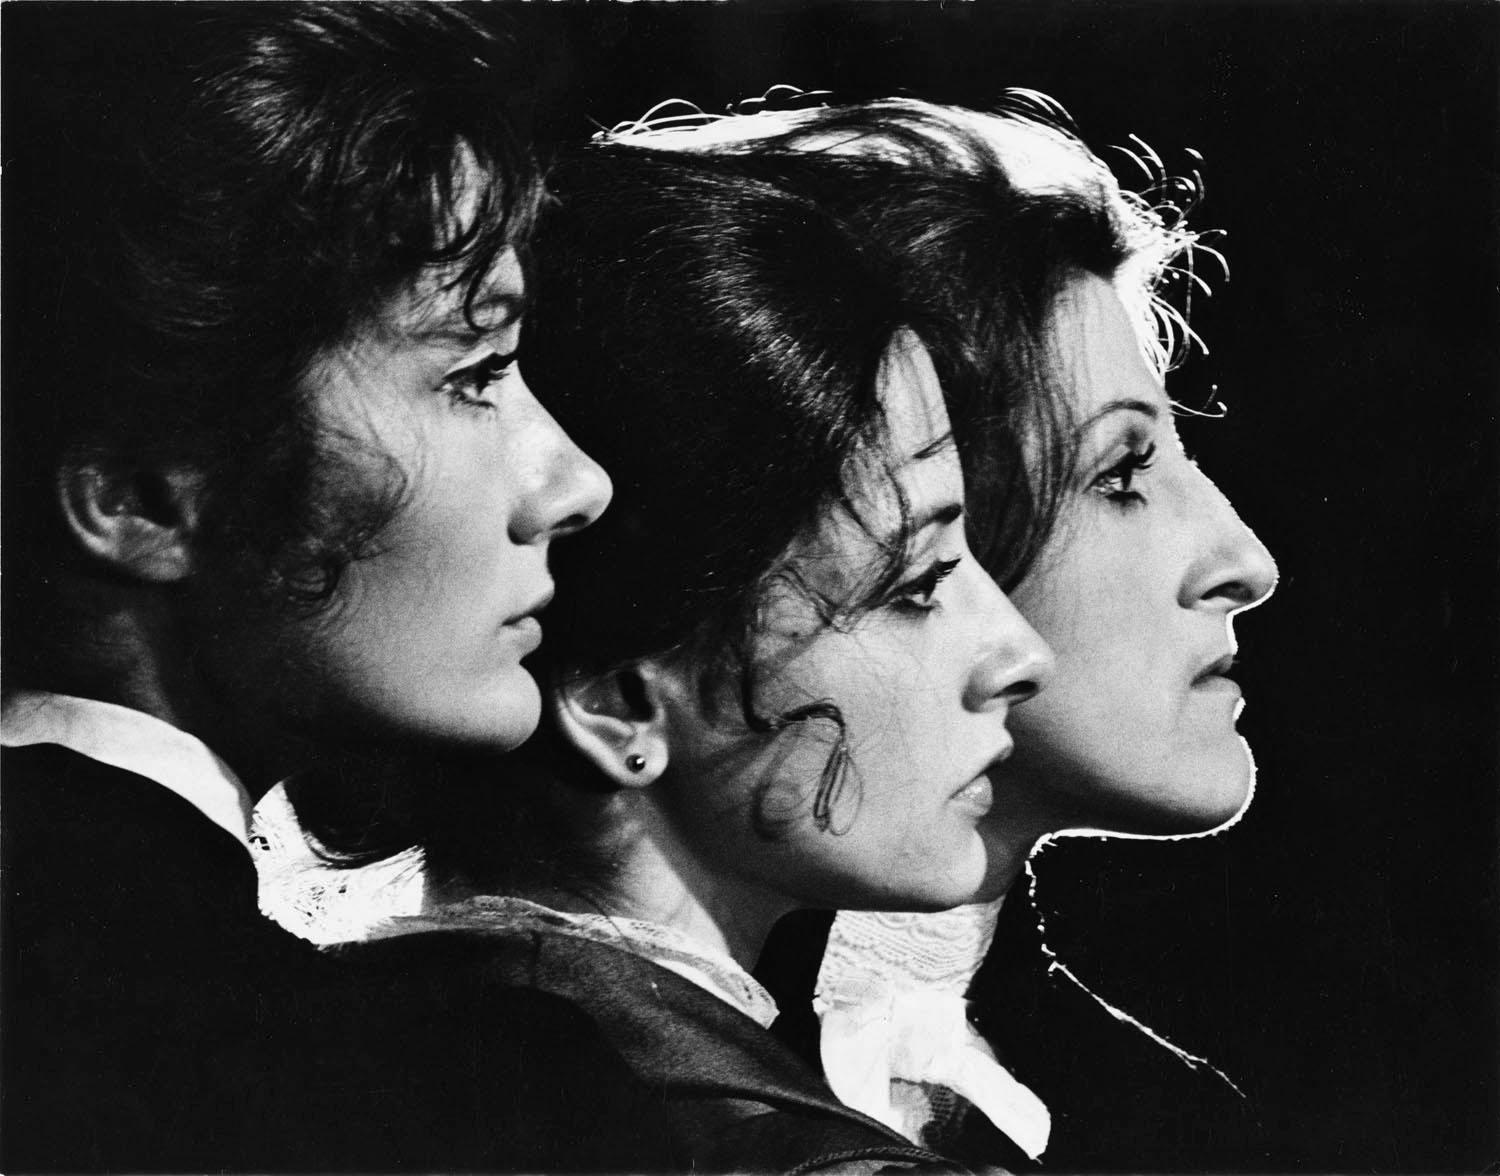 Jack Mitchell Black and White Photograph - Patti LuPone, Mary-Joan Negro, Mary Lou Rosato in "Three Sisters" signed by Jack